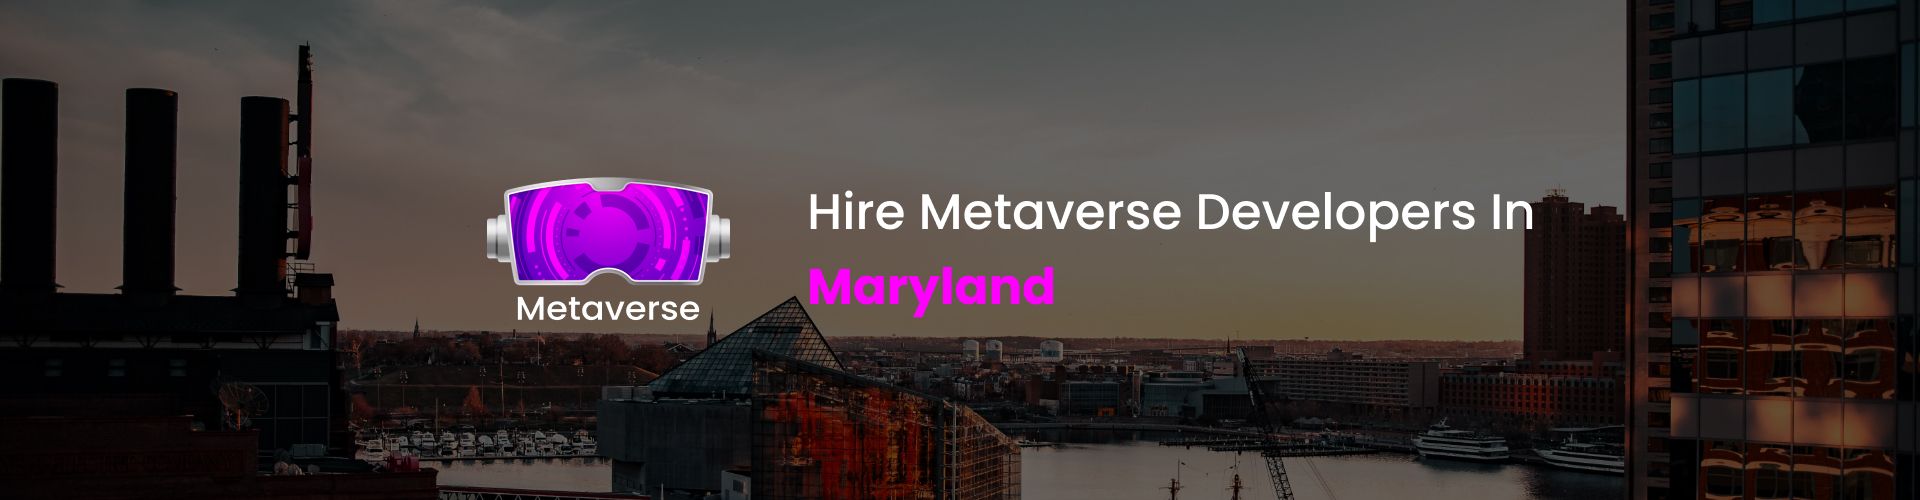 hire metaverse developers in maryland